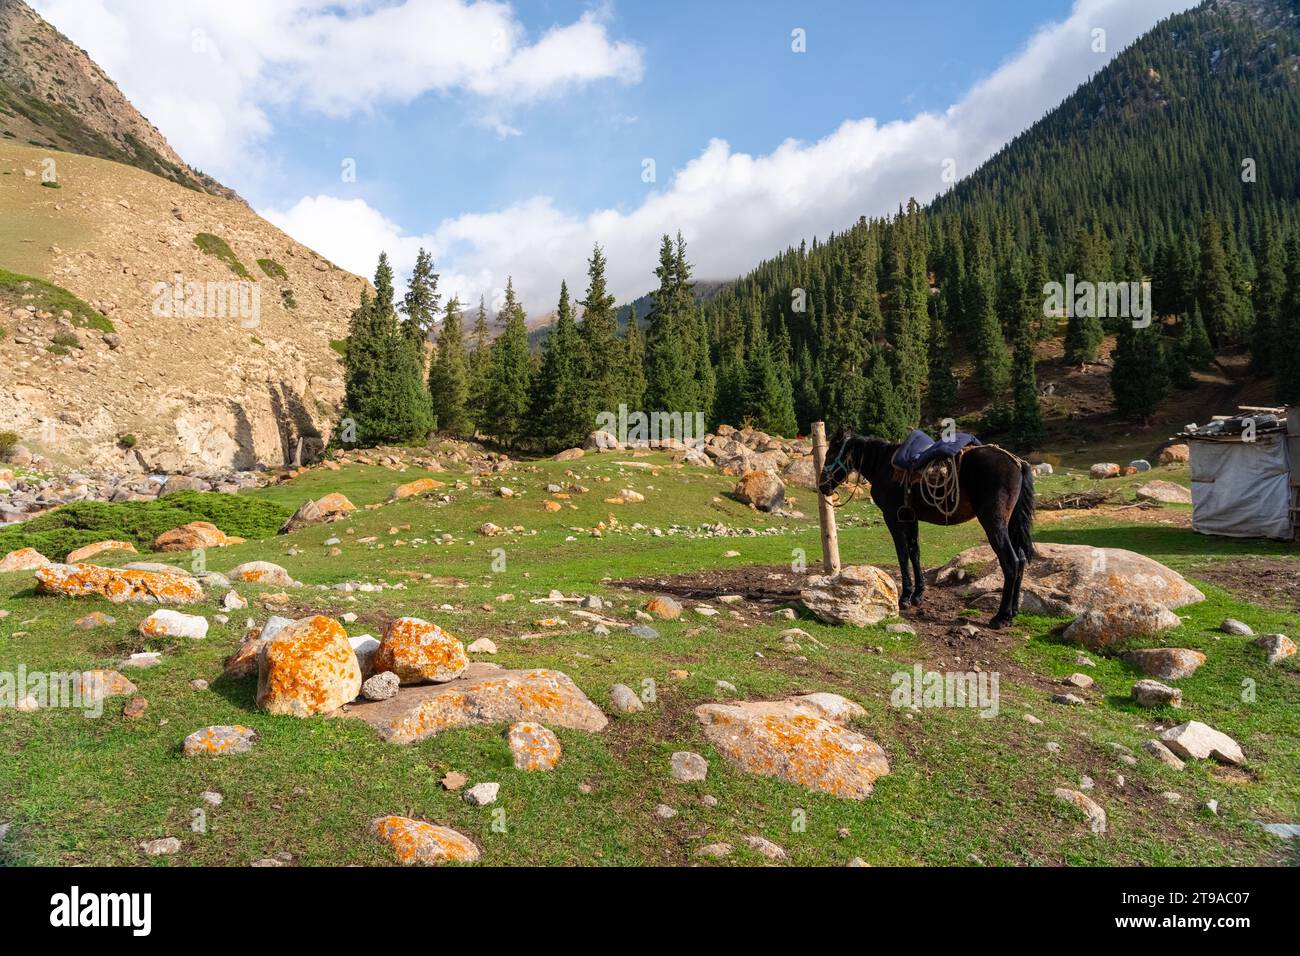 A herd of horses grazes in the mountains of Kyrgyzstan Stock Photo